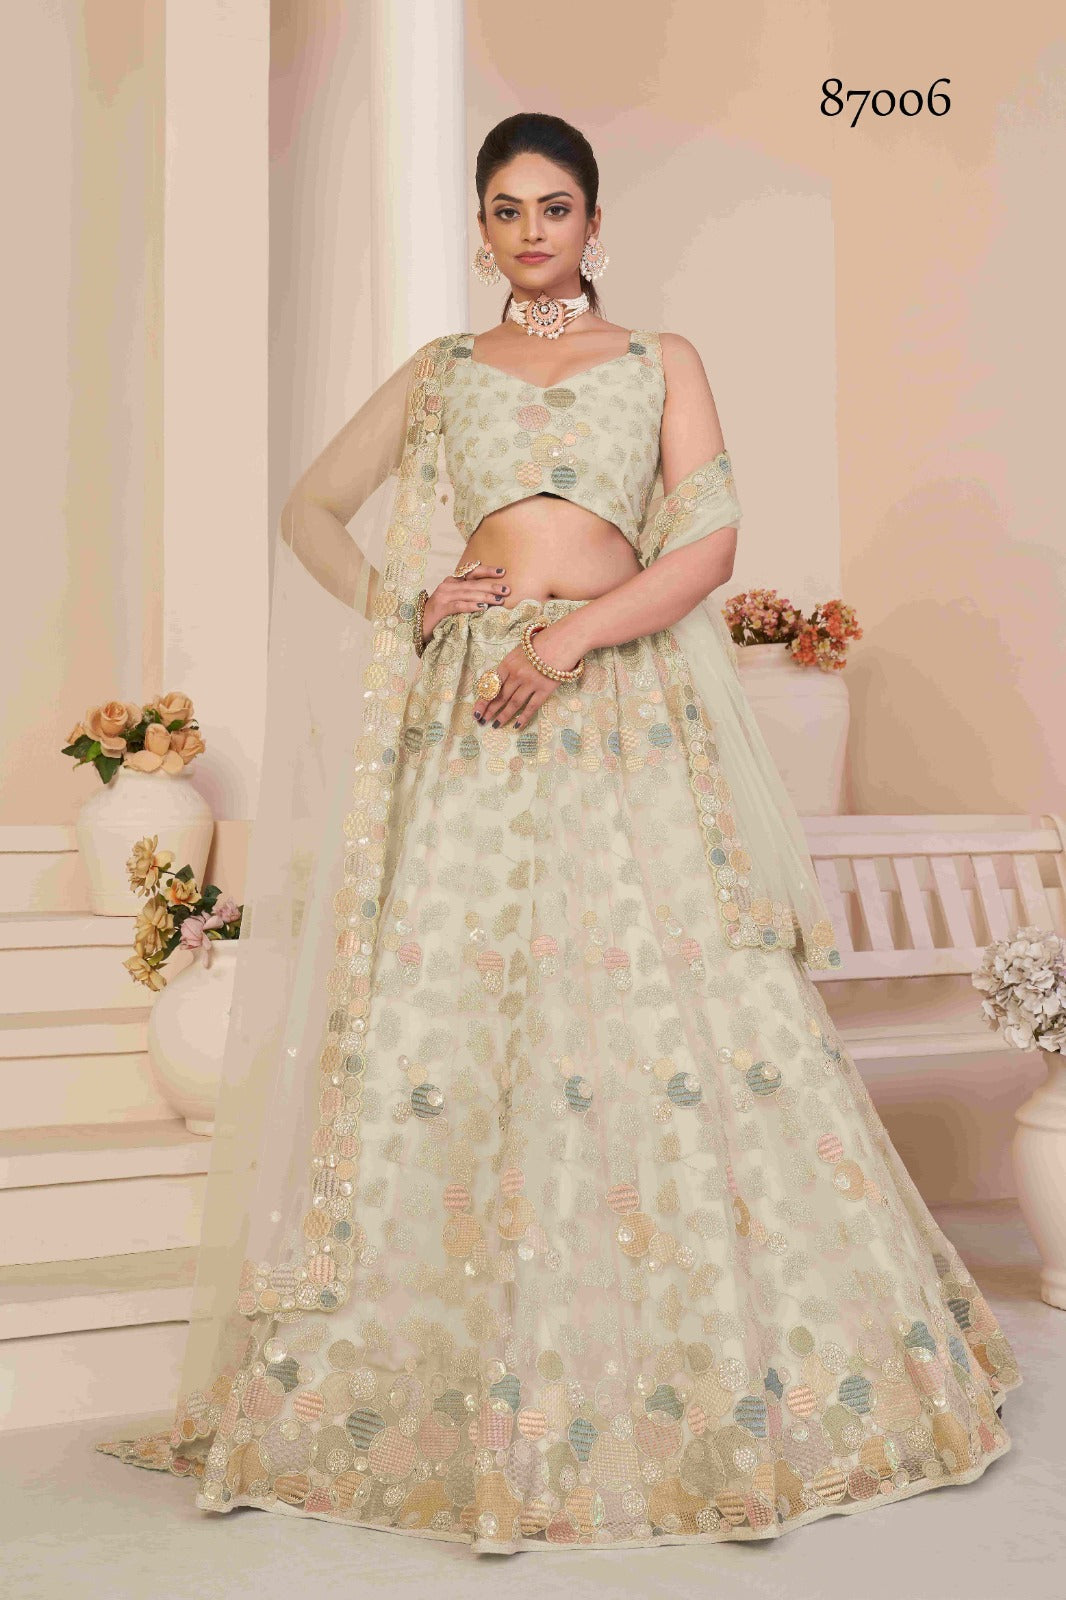 SKY BLUE COLOR THREAD & SEQUINS EMBROIDERED SEMI STITCHED LEHENGA CHOLI FOR BRIDE